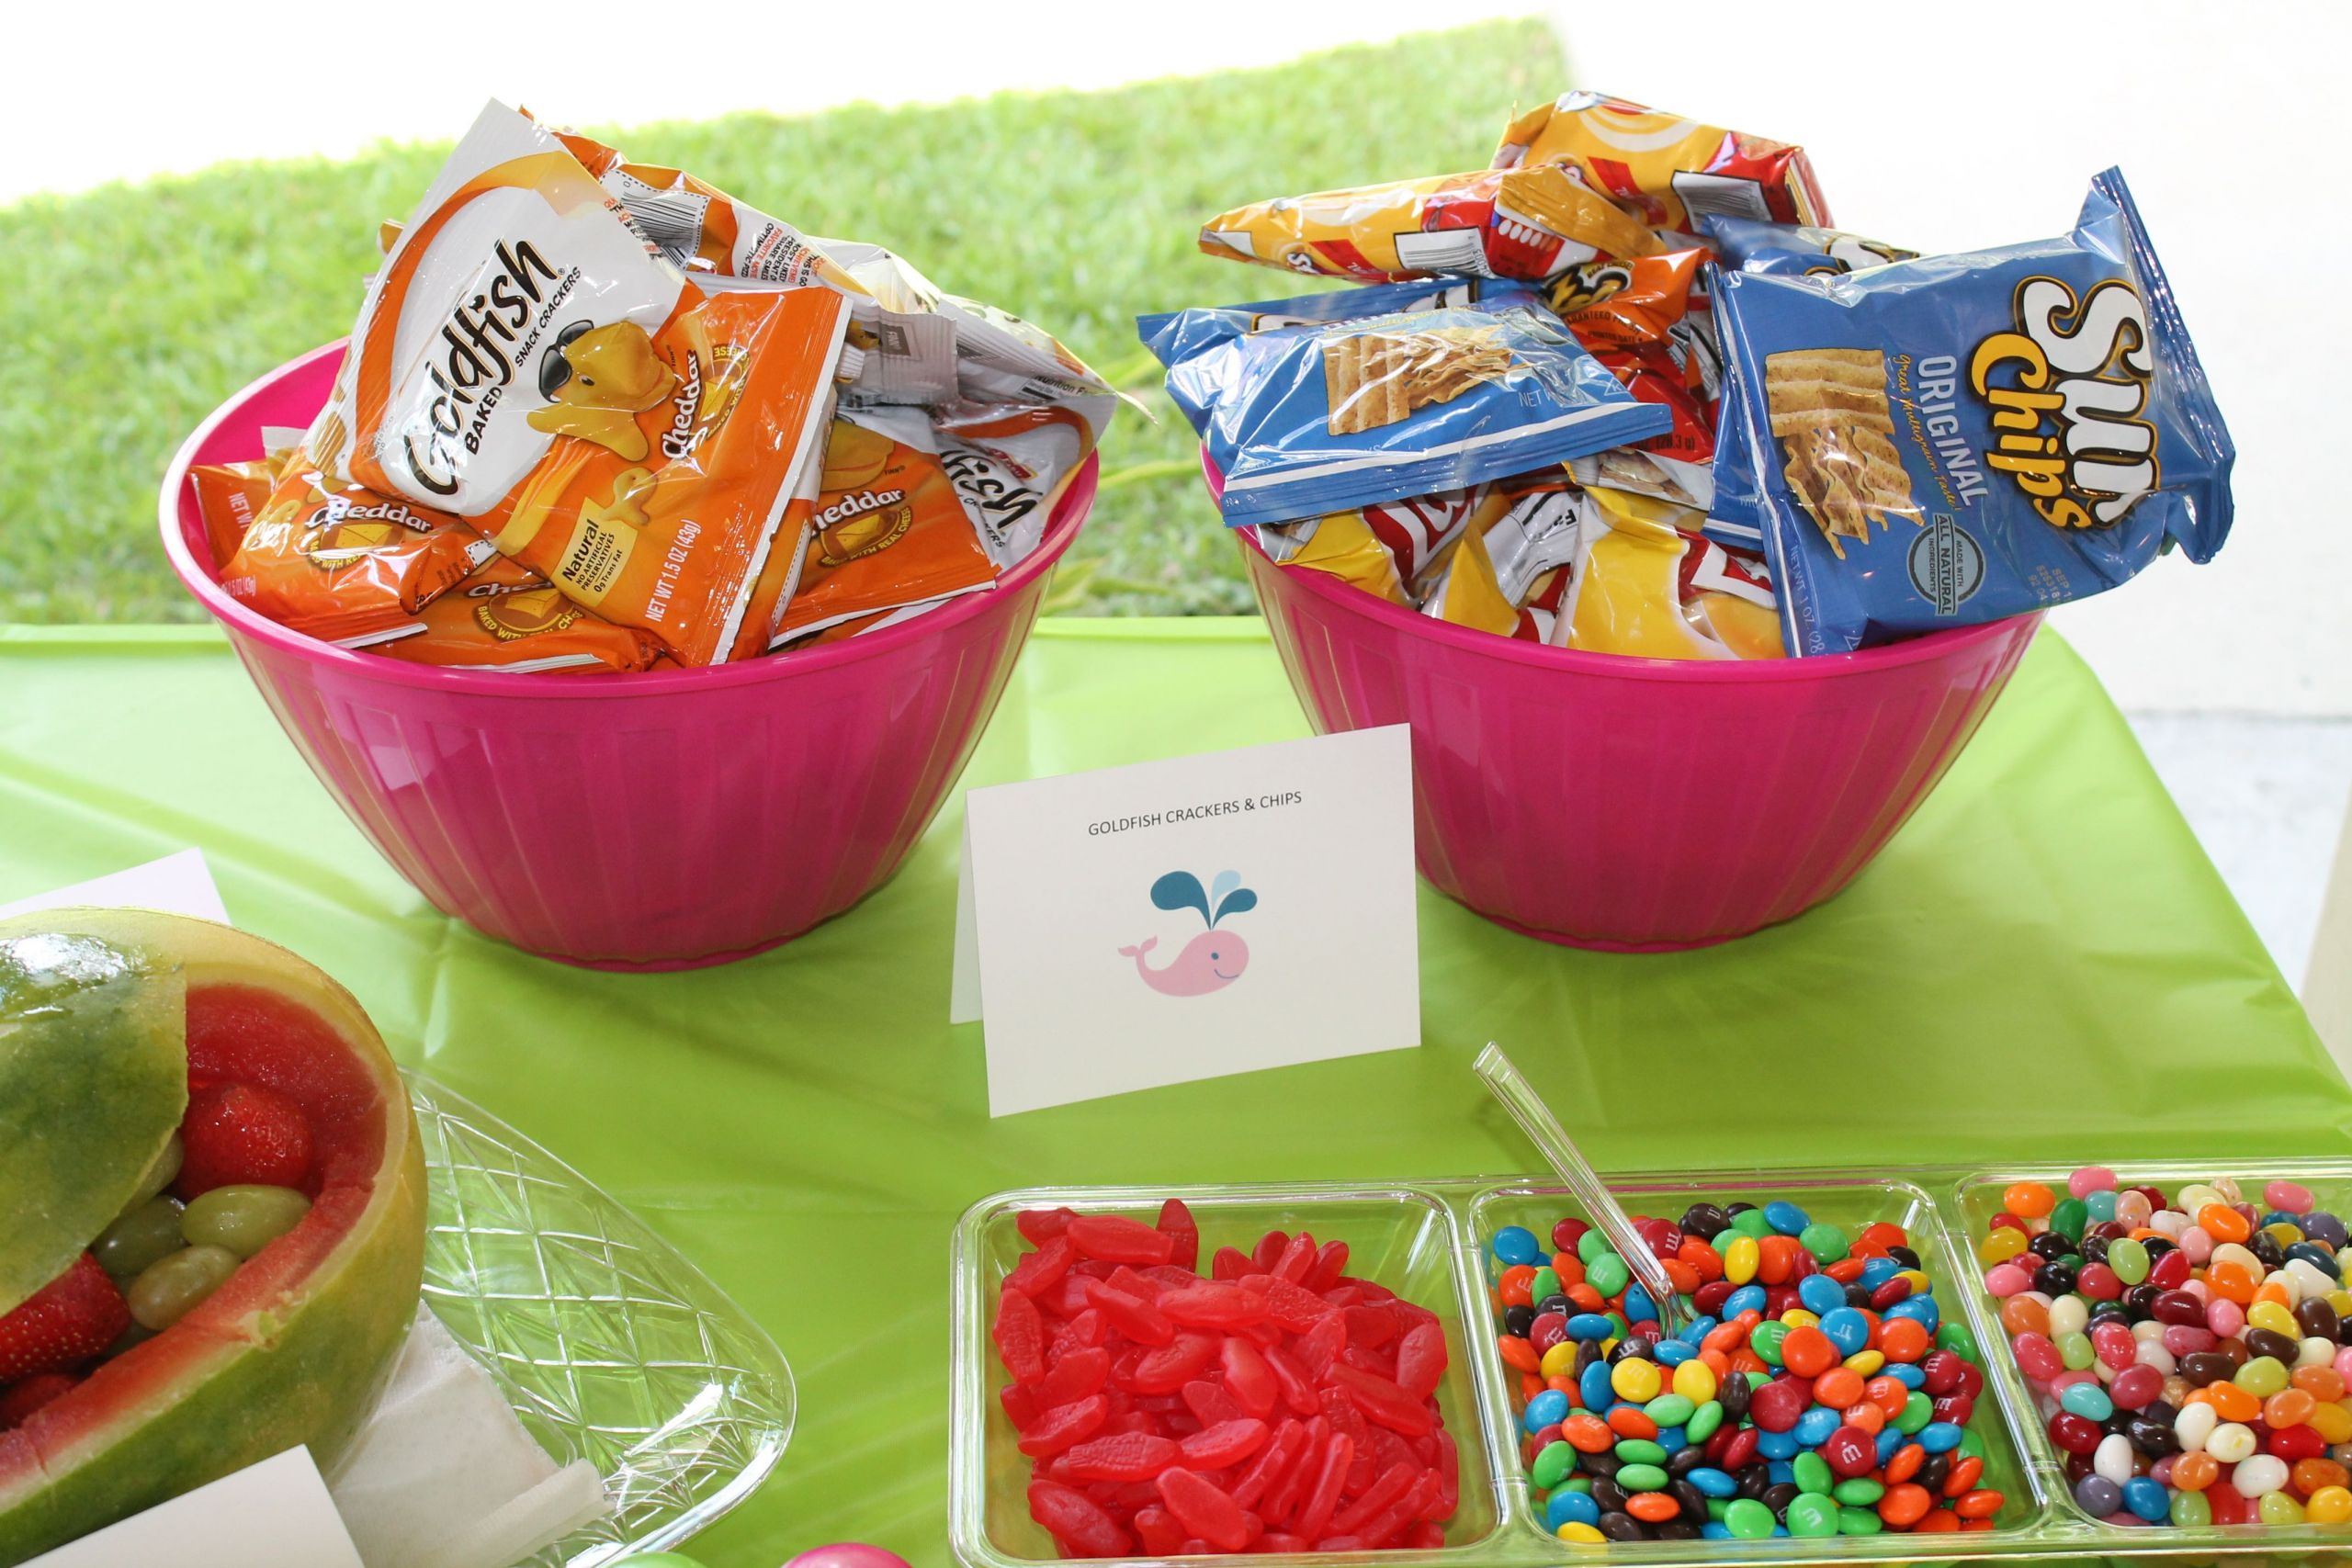 Pool Party Food Ideas For Tweens
 Goldfish crackers fit the theme but the chips were more